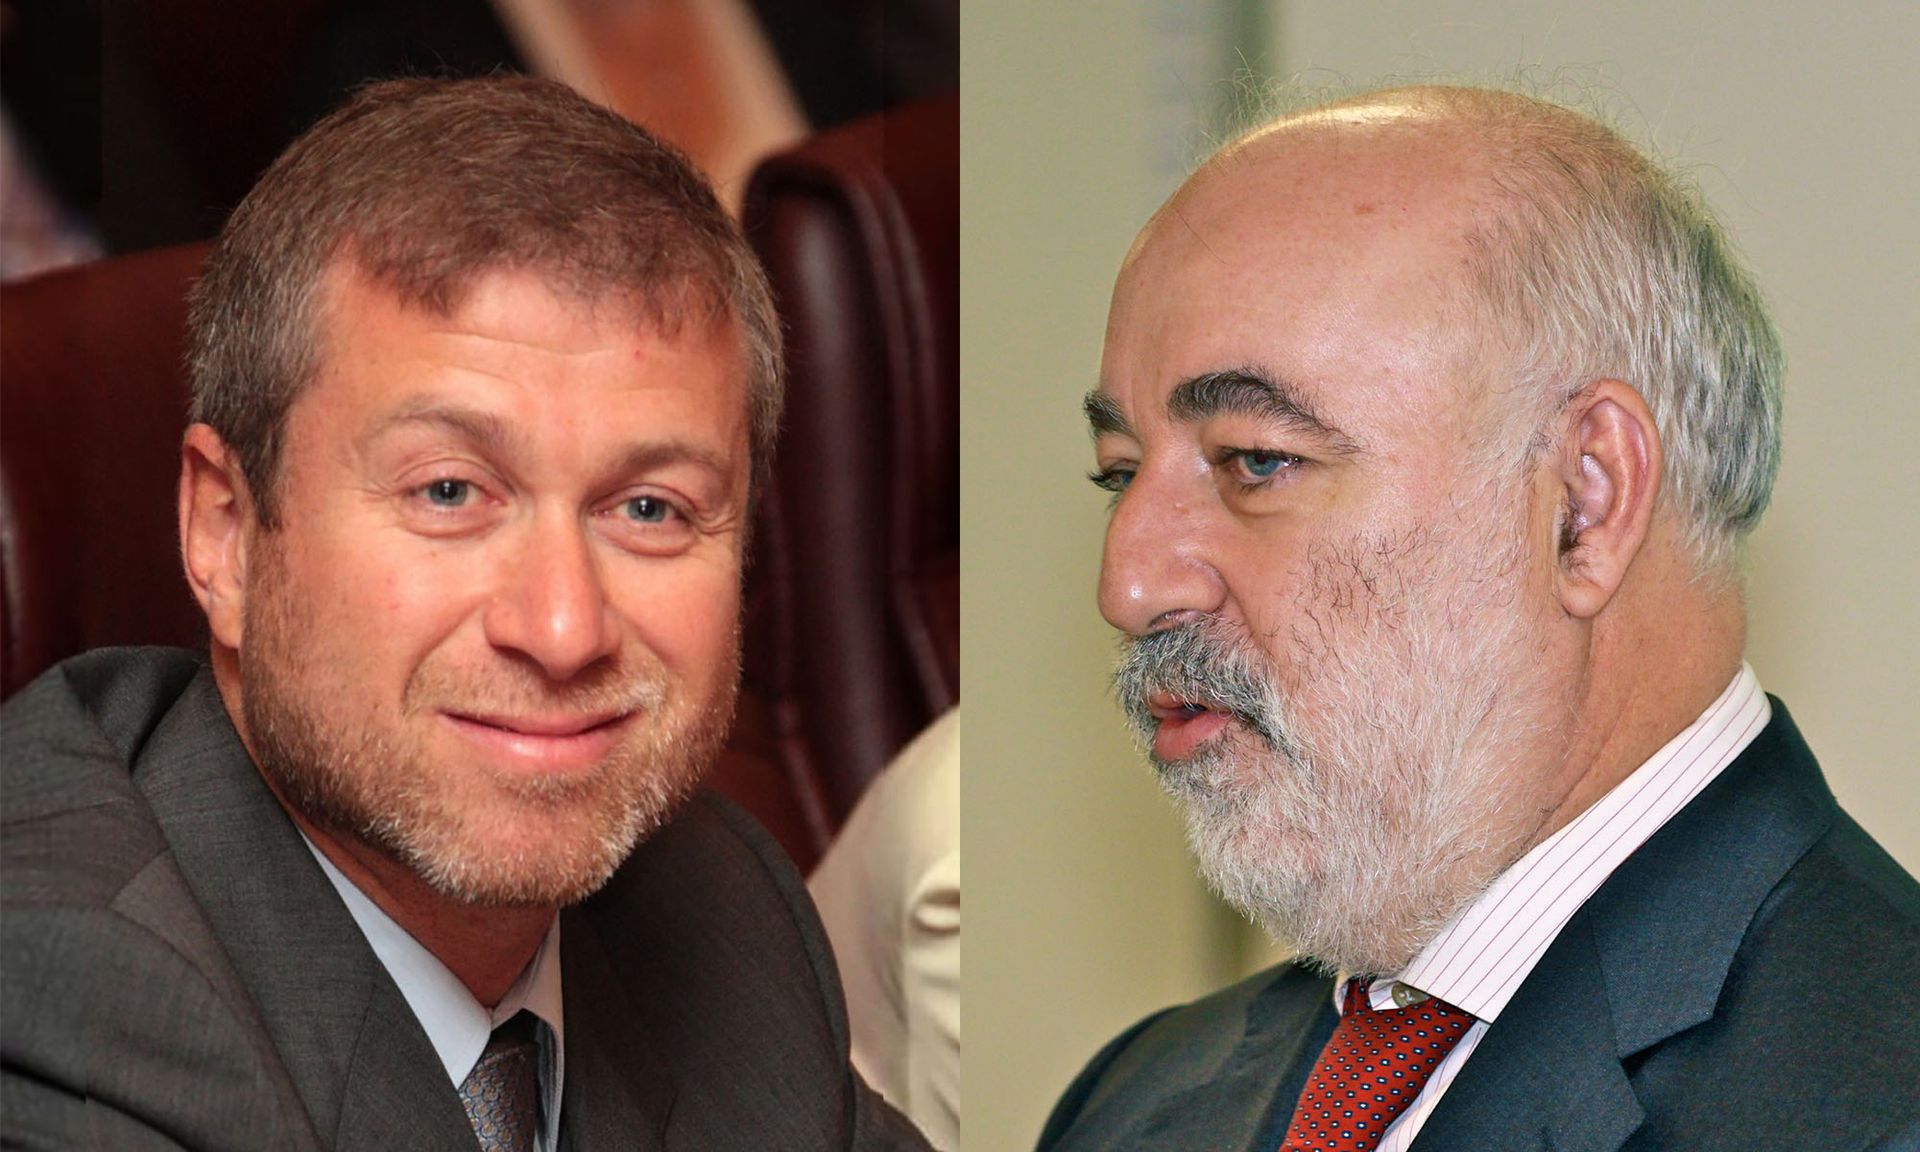 Roman Abramovich (left) and Viktor Vekselberg are among the Russian art patrons who have been subject to US sanctions Abramovich: Photo by Marina Lystseva, via Wikimedia Commons. Vekselberg: Photo by Jürg Vollmer, via Flickr, CC BY-SA 2.0.